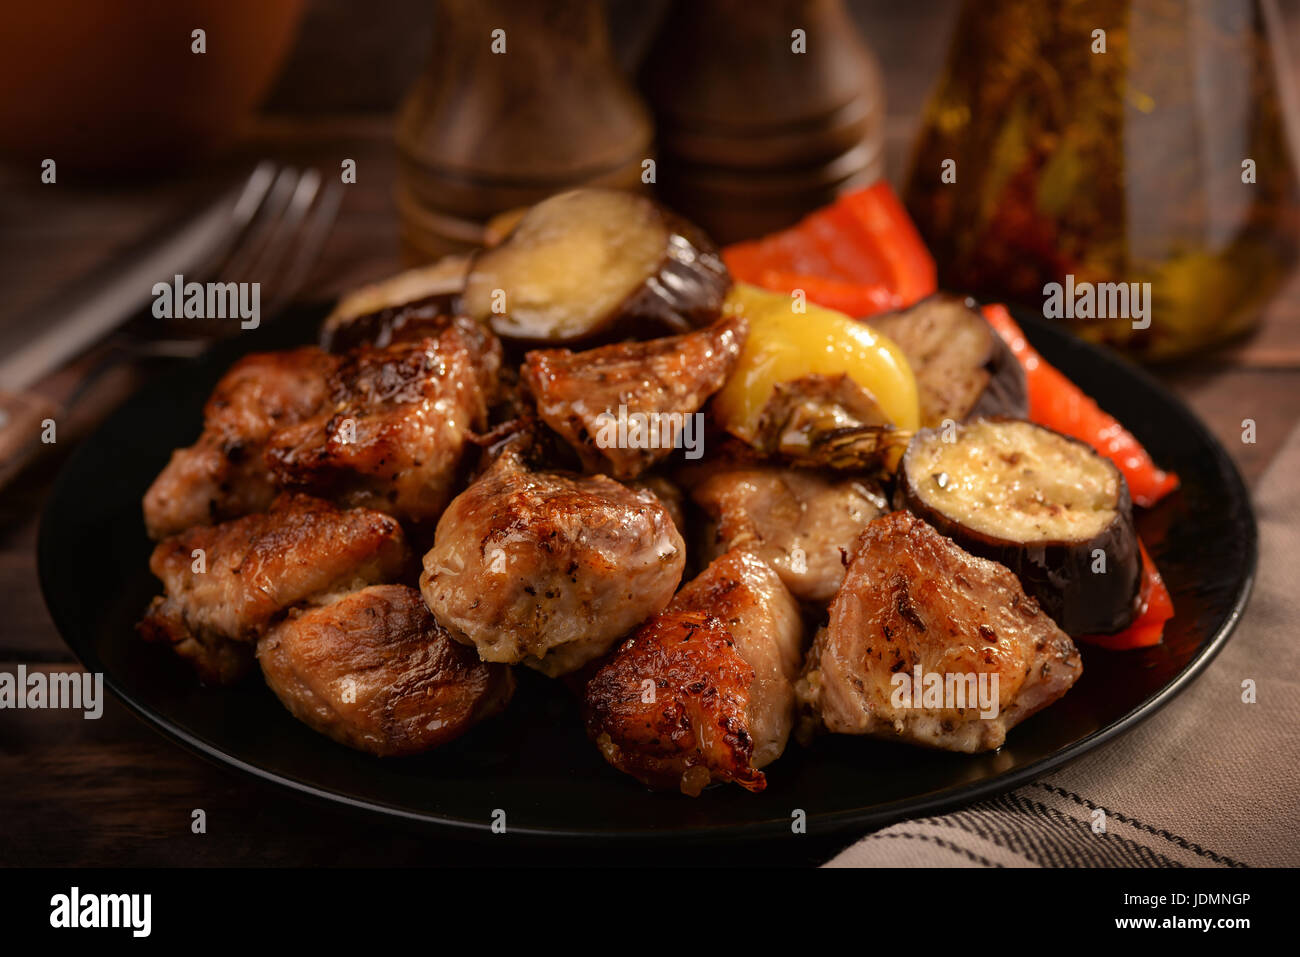 Still life with grilled meat and veggies Stock Photo